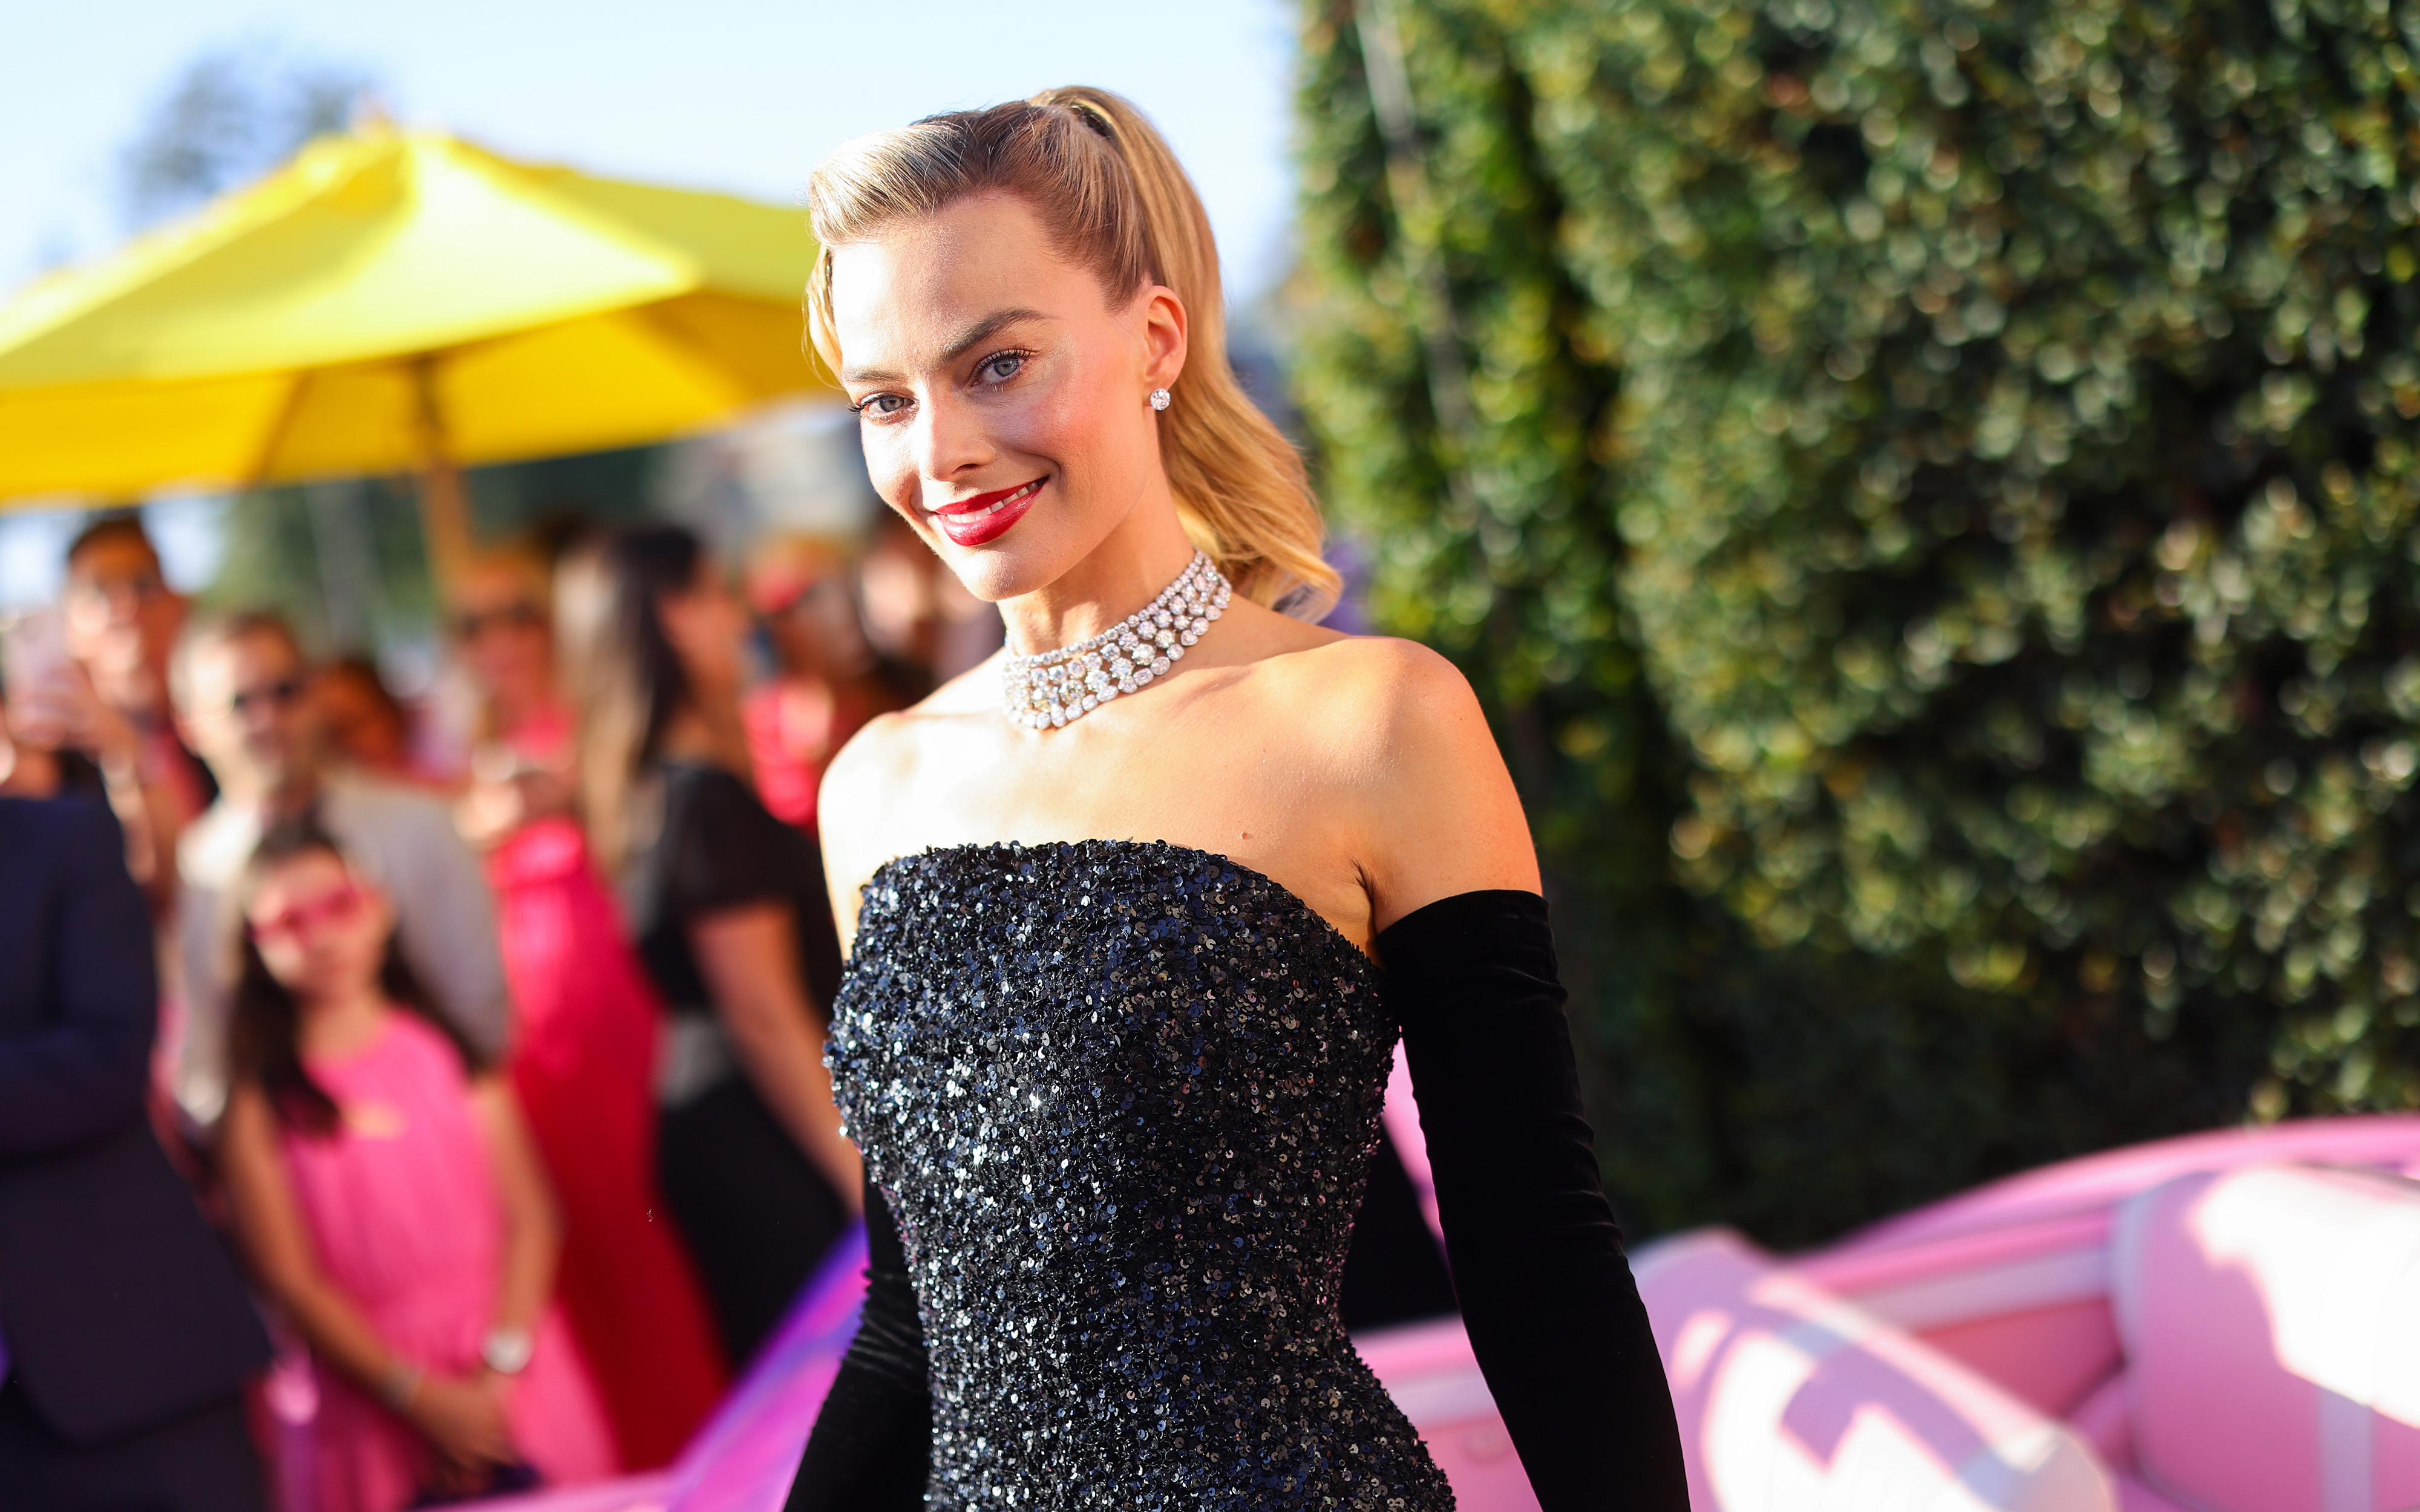 Margot Robbie's Pink Airport Luggage Is About to Sell Out